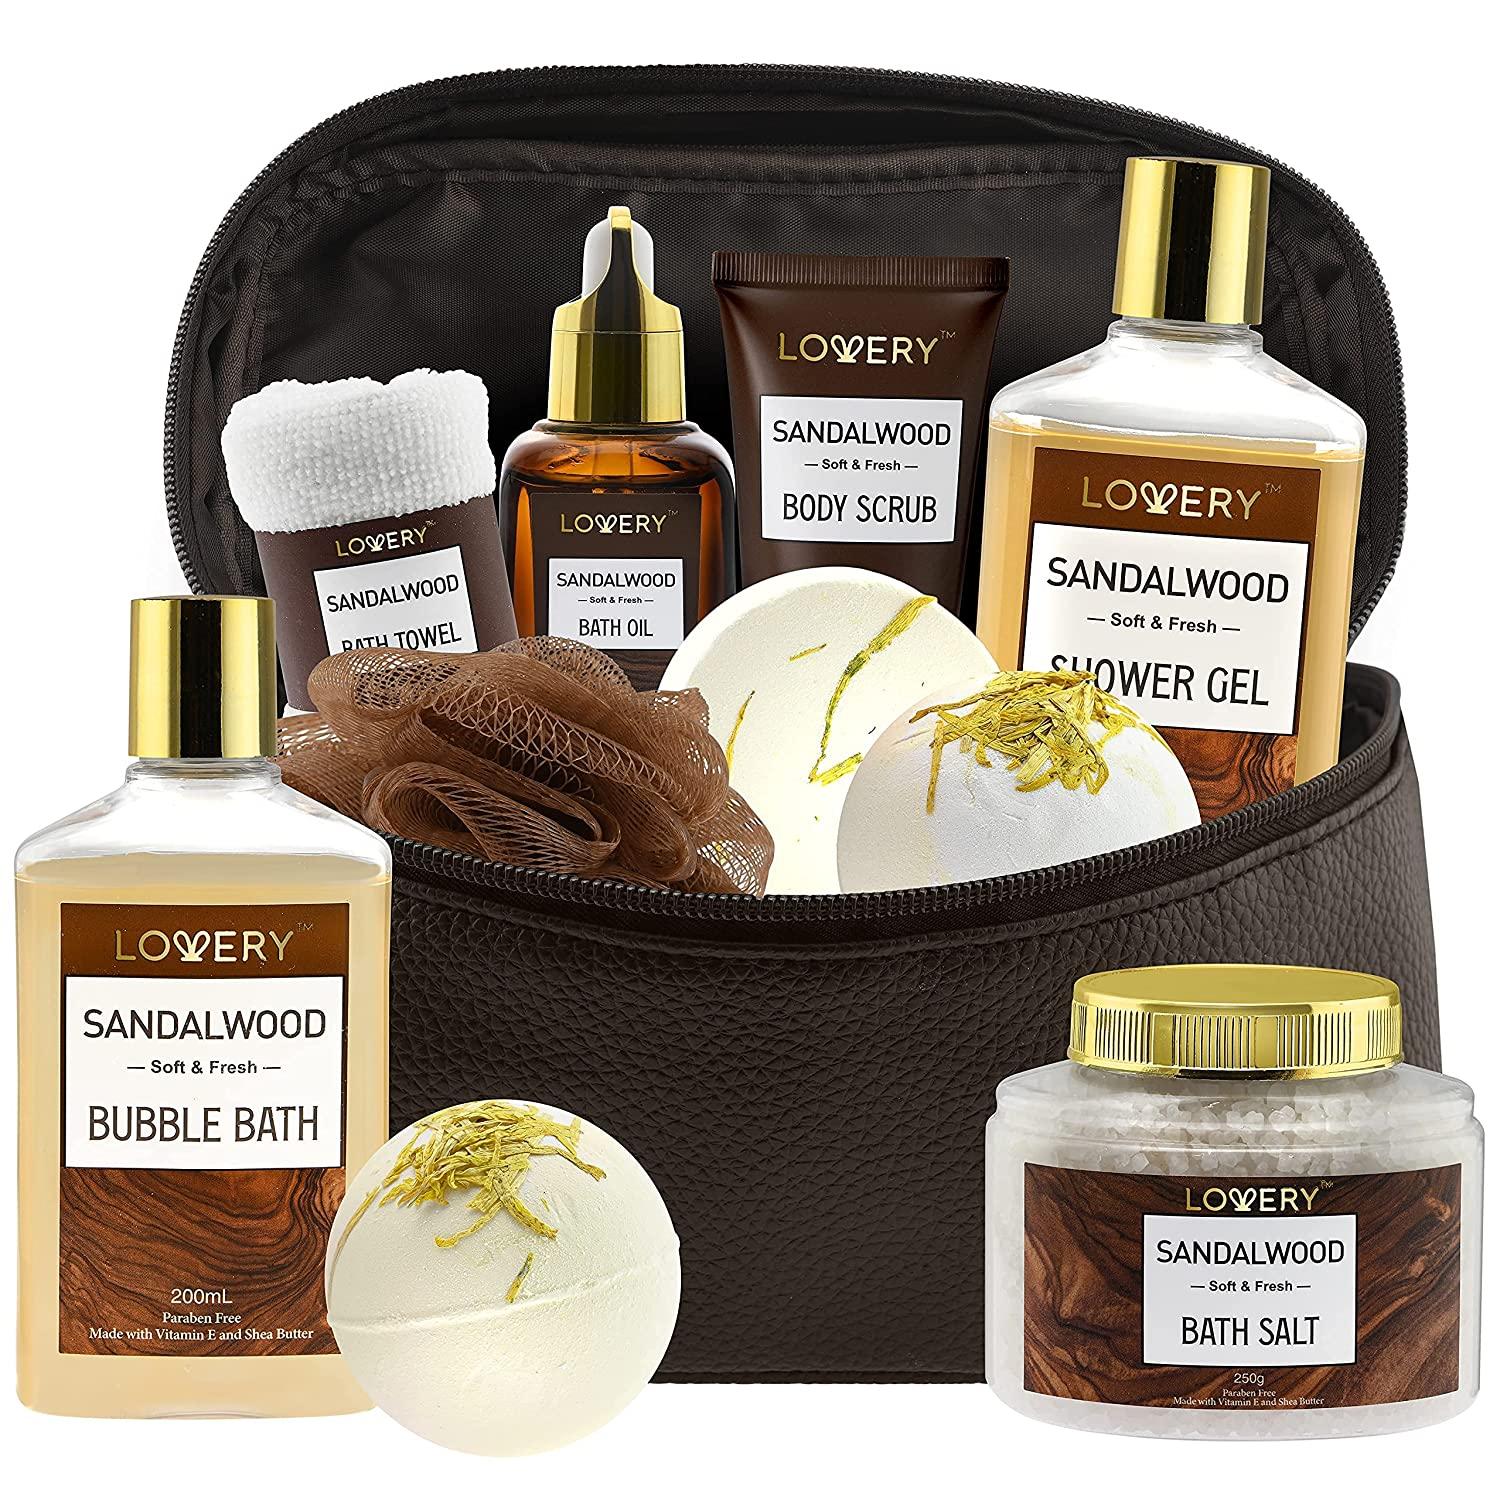 Lovery Mens Gift Set 14pc Sandalwood Bath Gift Set Personal Self Care Kit Gifts from Son Relaxing Man Gift Basket for Dad Boyfriend Husband - Birthday